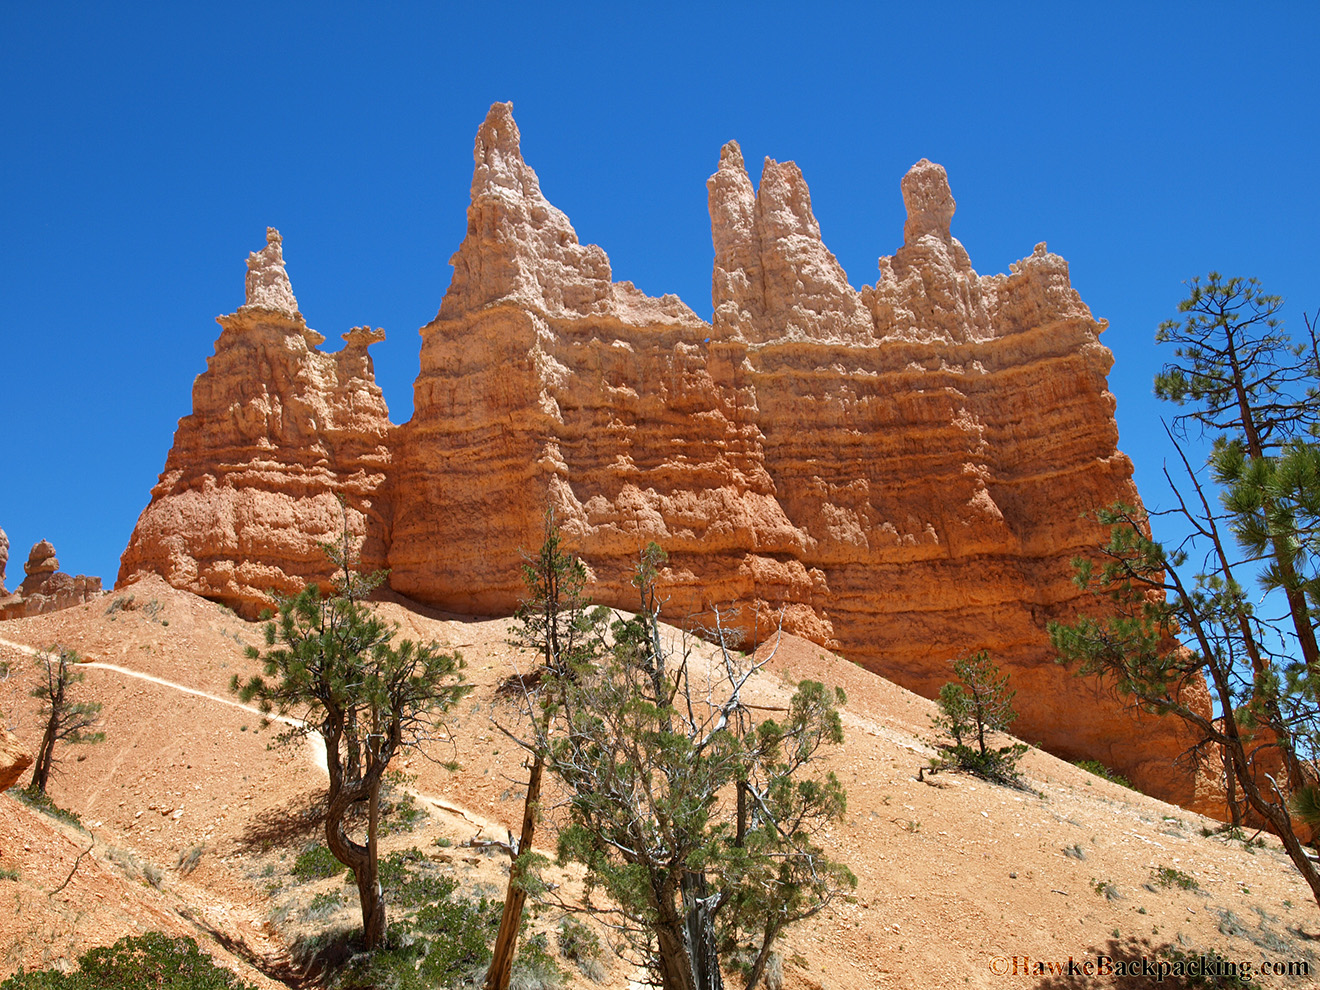 http://hawkebackpacking.com/images/pictures/north_america/utah/bryce_canyon_national_park/utah_bryce_canyon_national_park_06.jpg